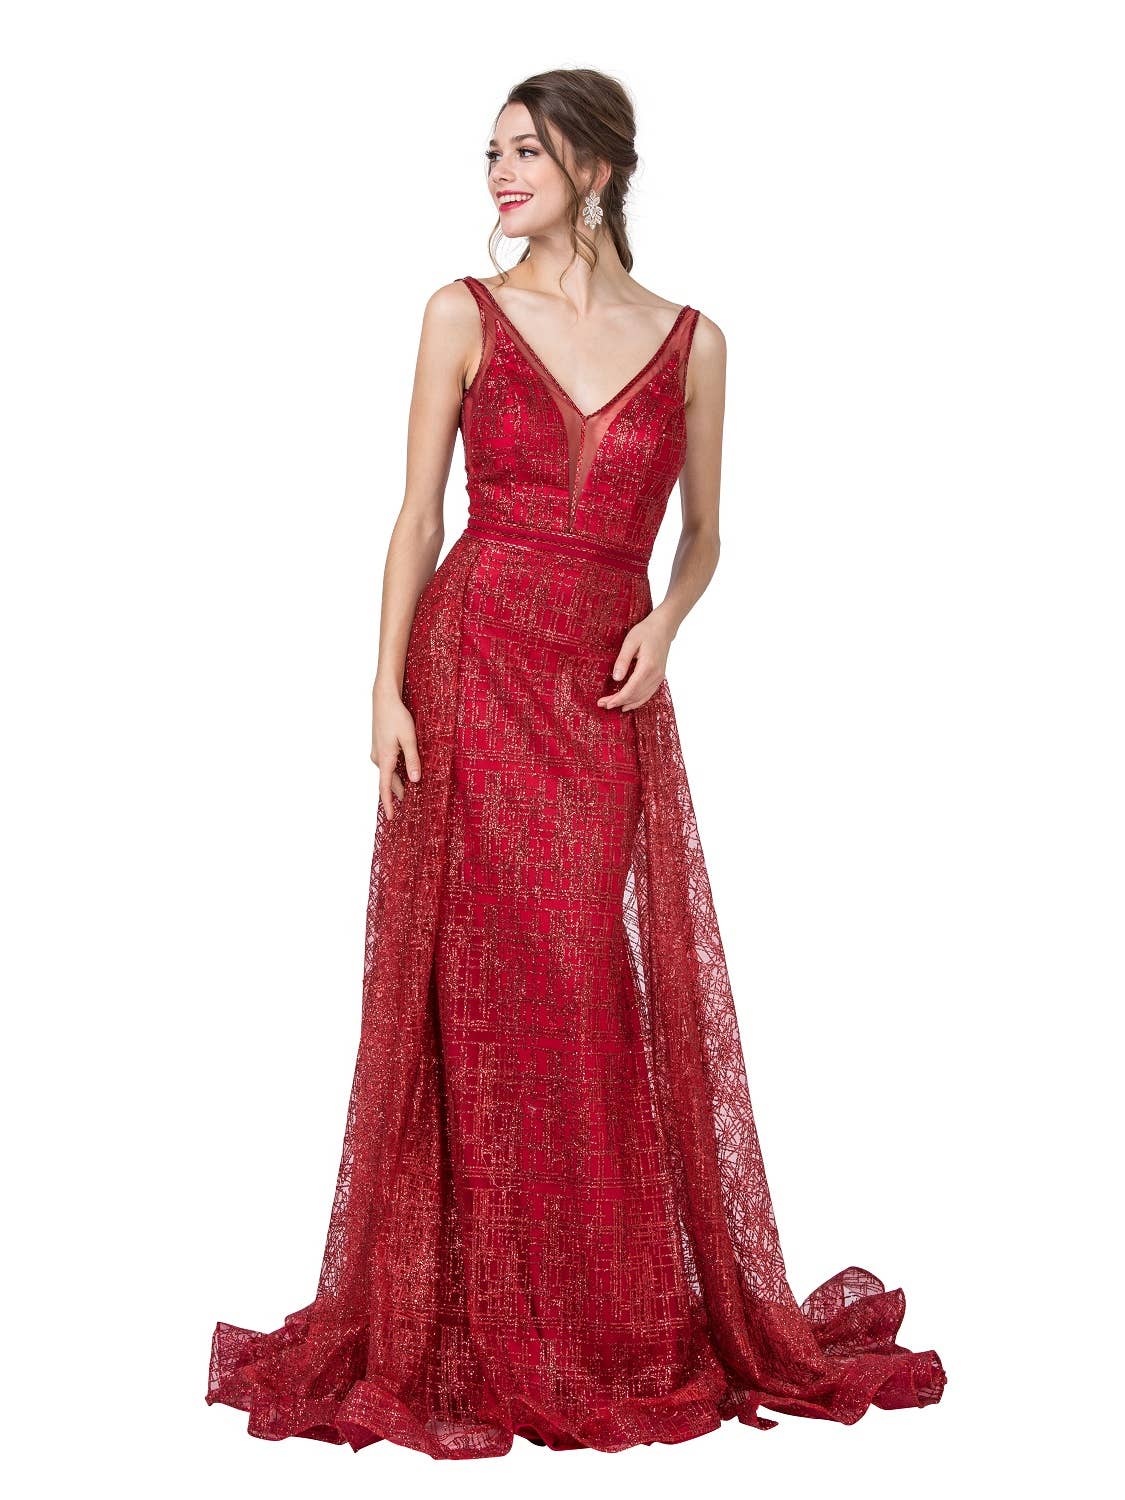 New Anny Lee Burgundy Glitter Formal Gown - Size XS